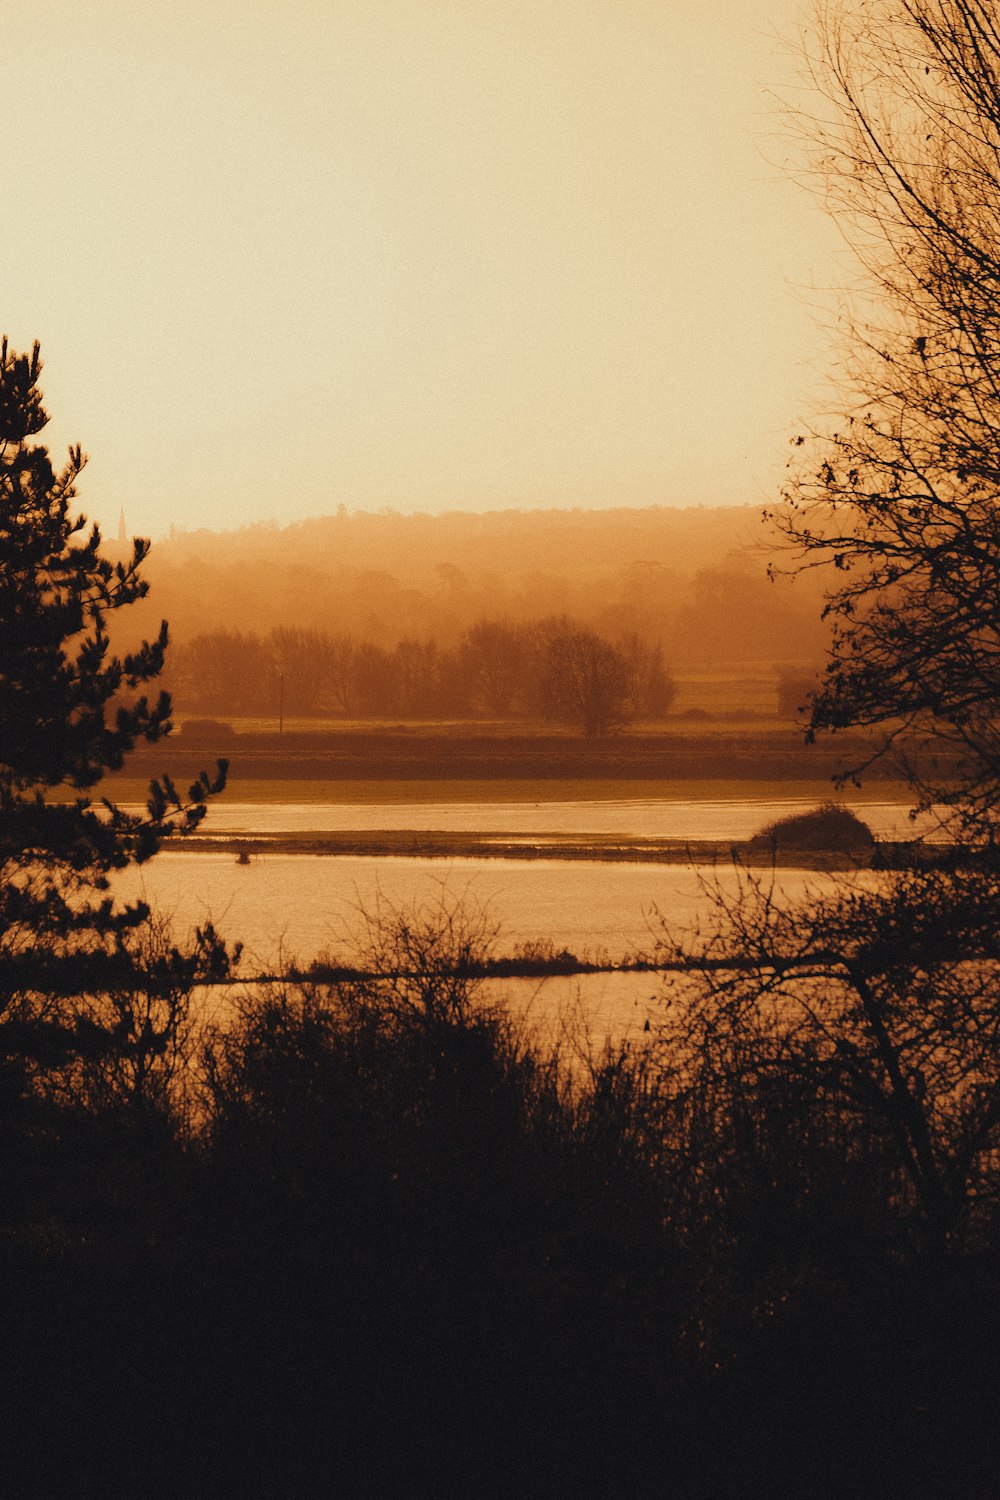 a body of water surrounded by trees and a hill